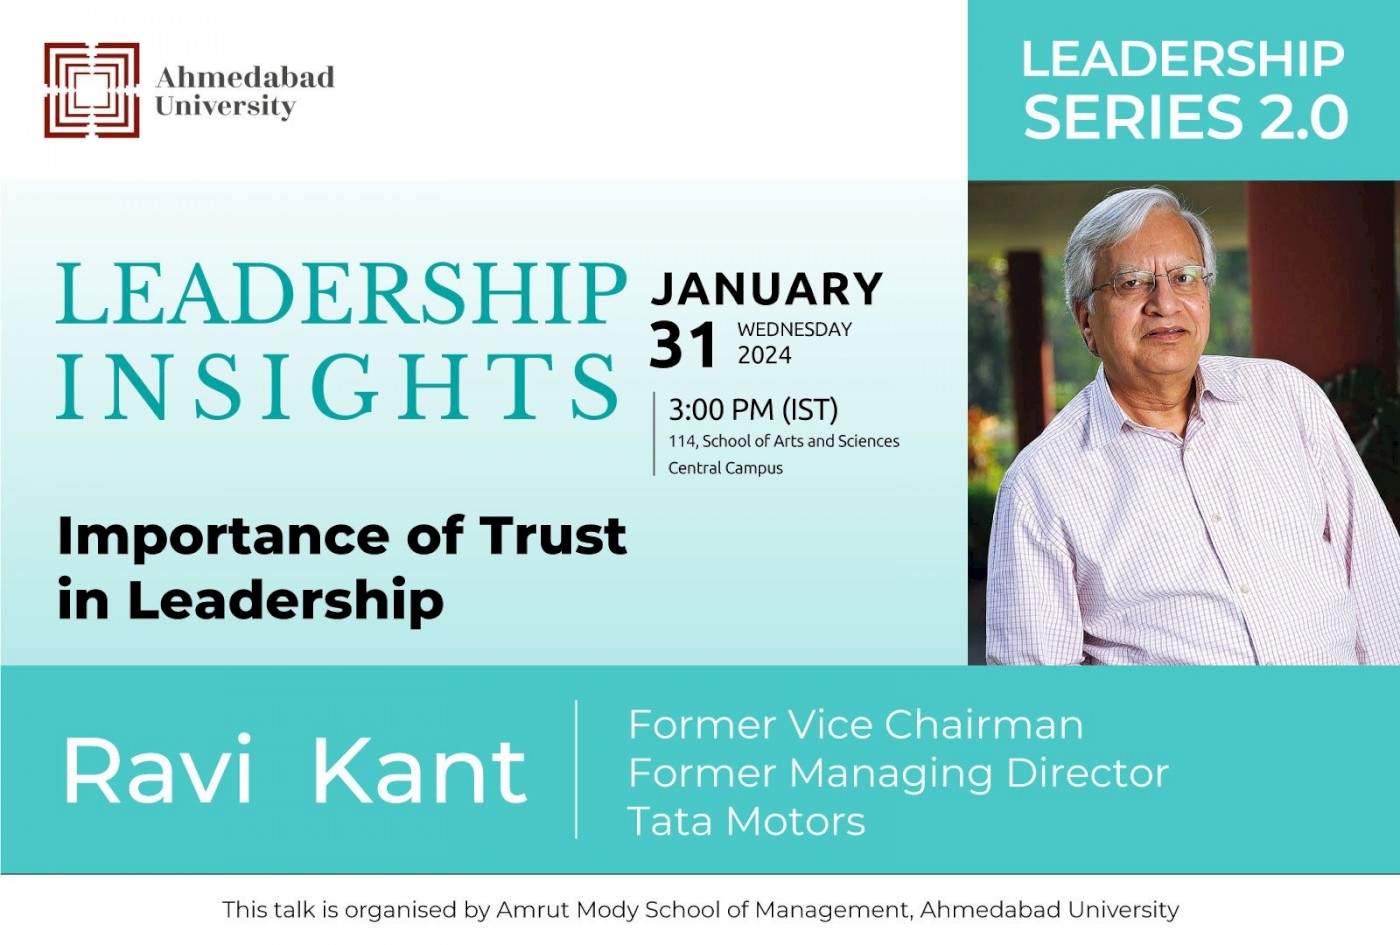 Importance of Trust in Leadership